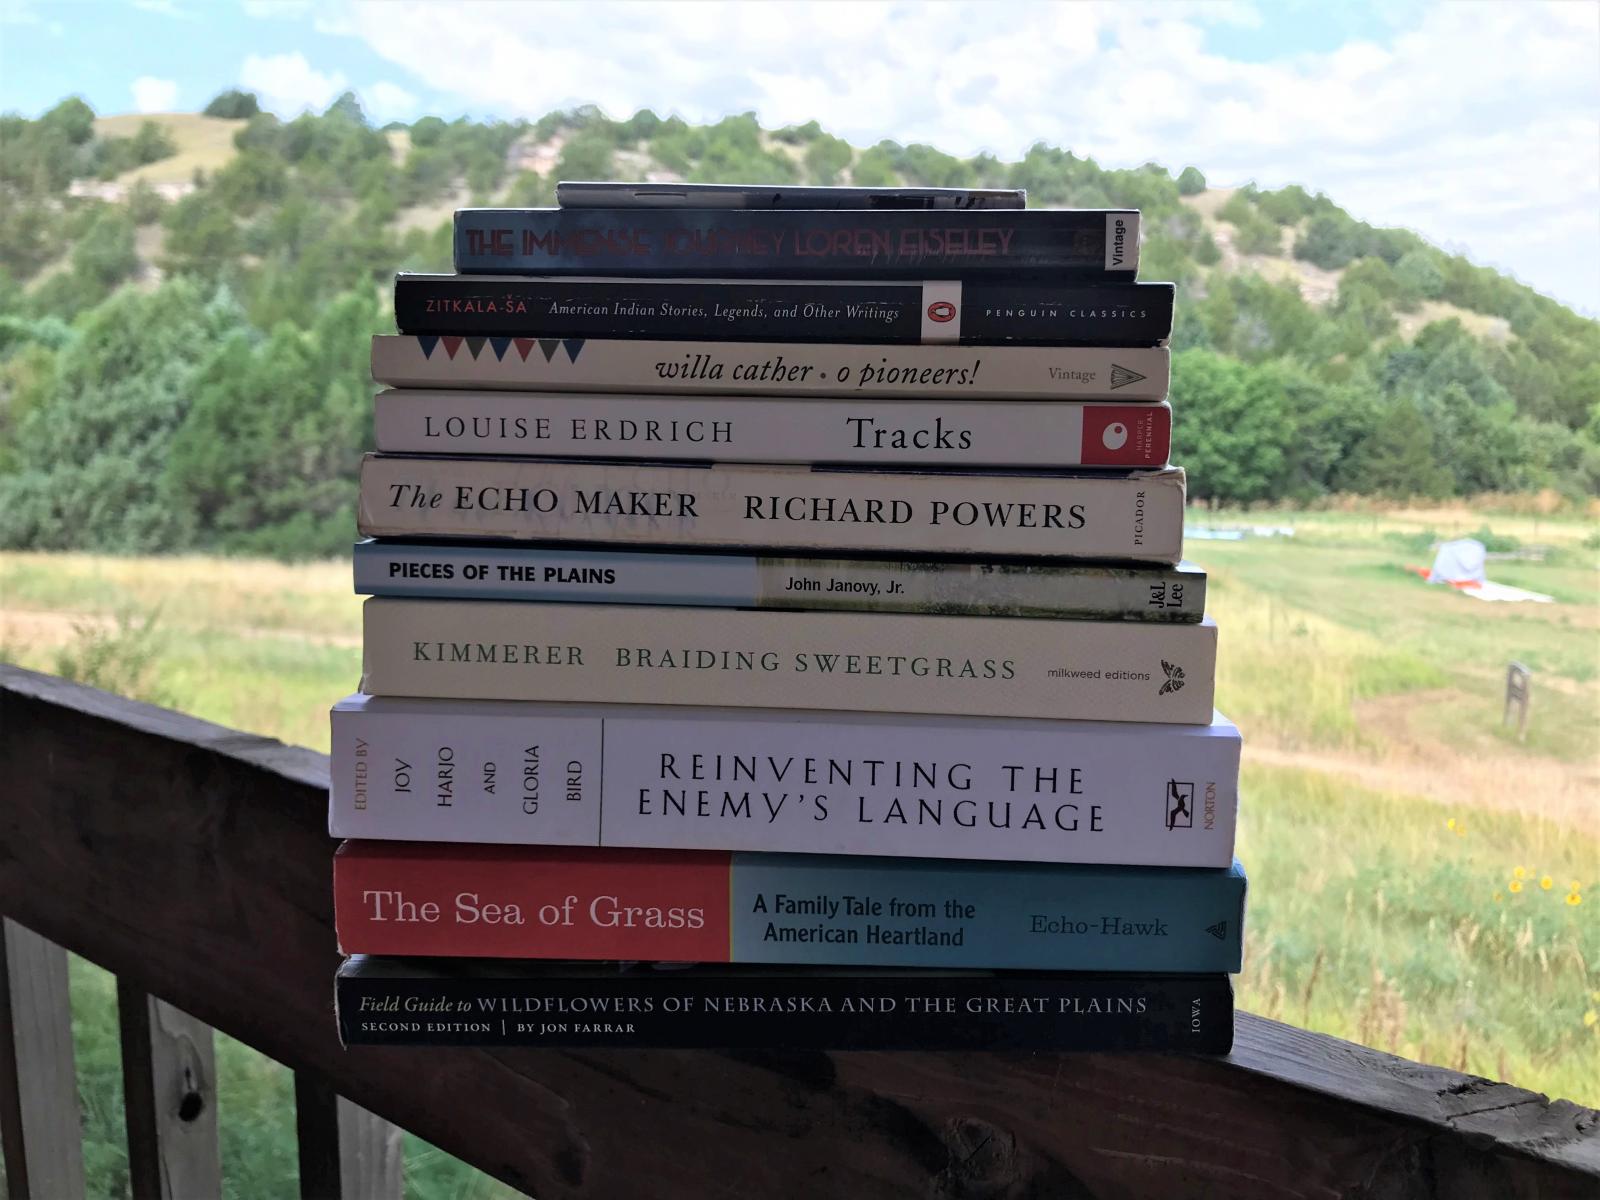 Stack of books on a railing with hills in the background.